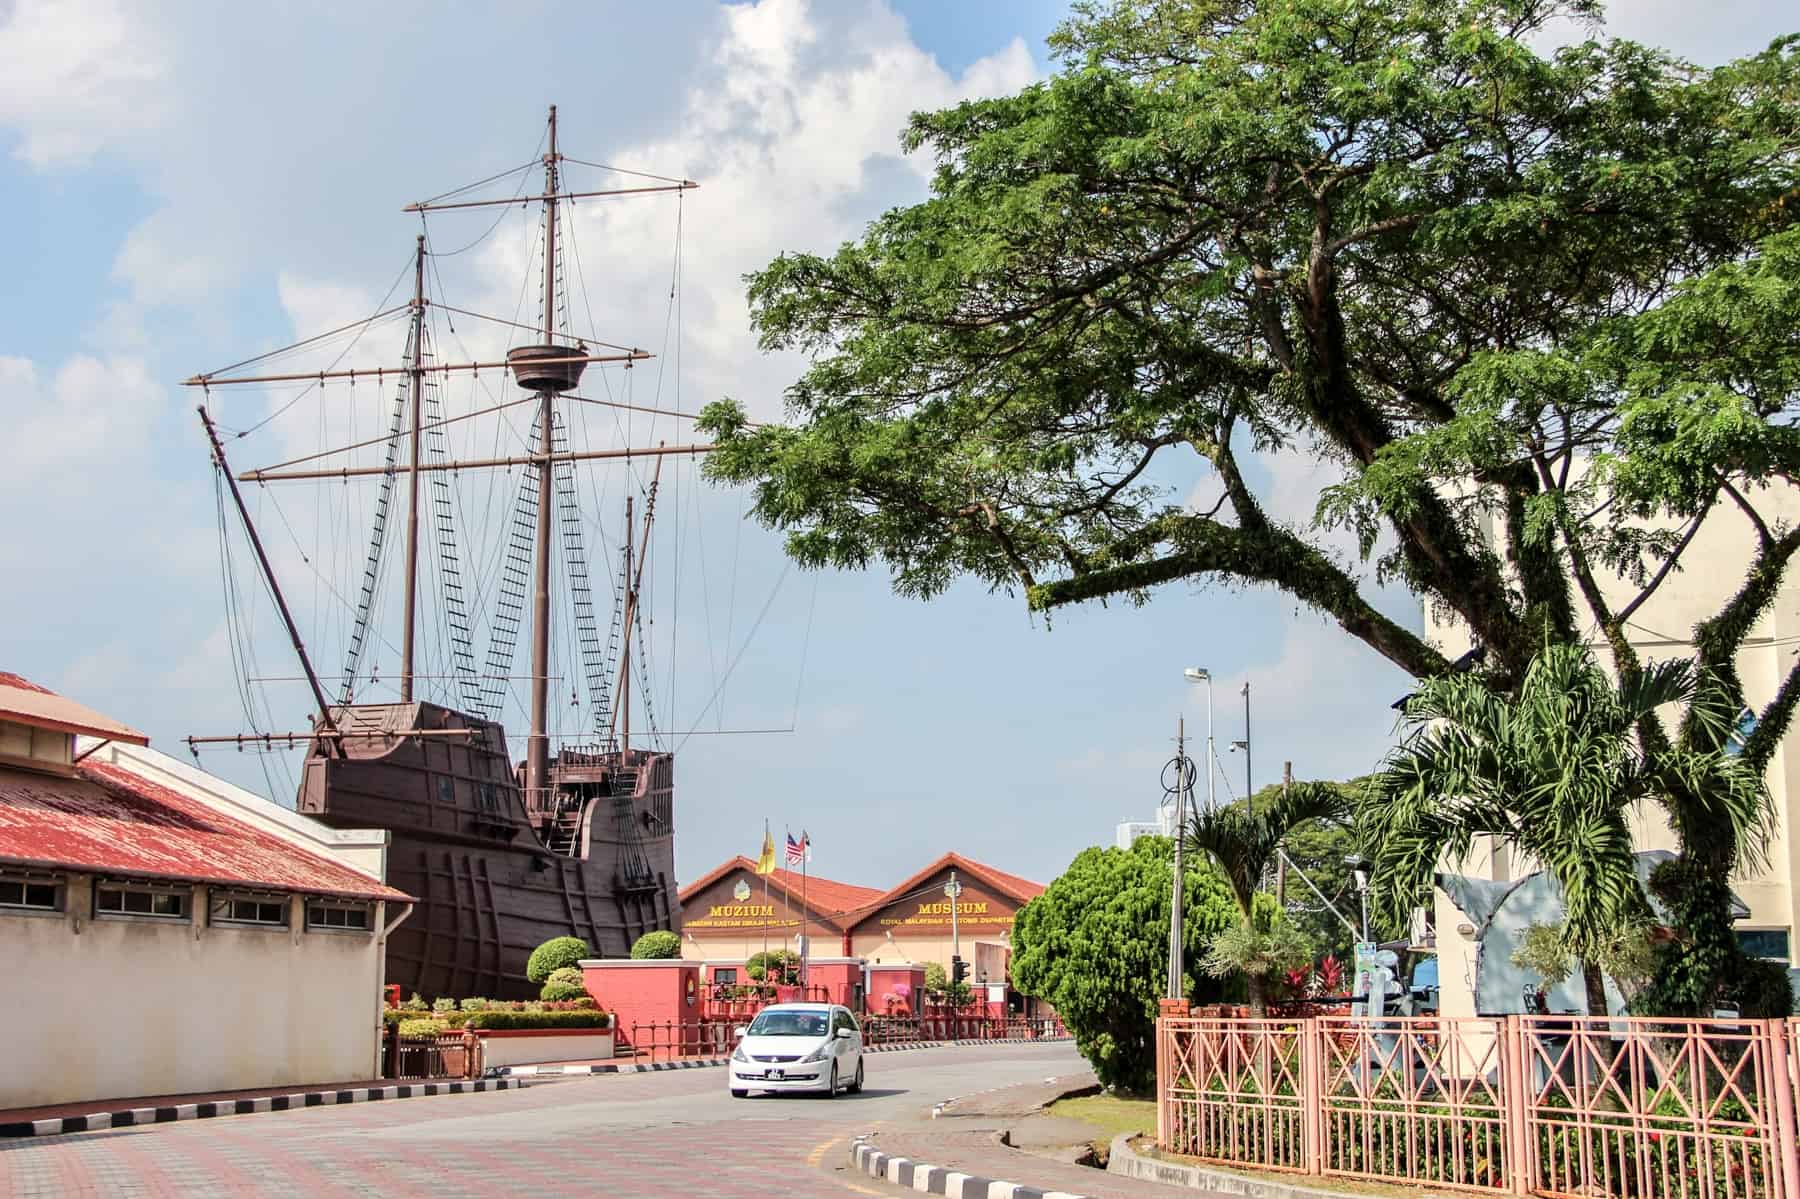 A old vessel structure next to a main road in Melaka, Malaysia